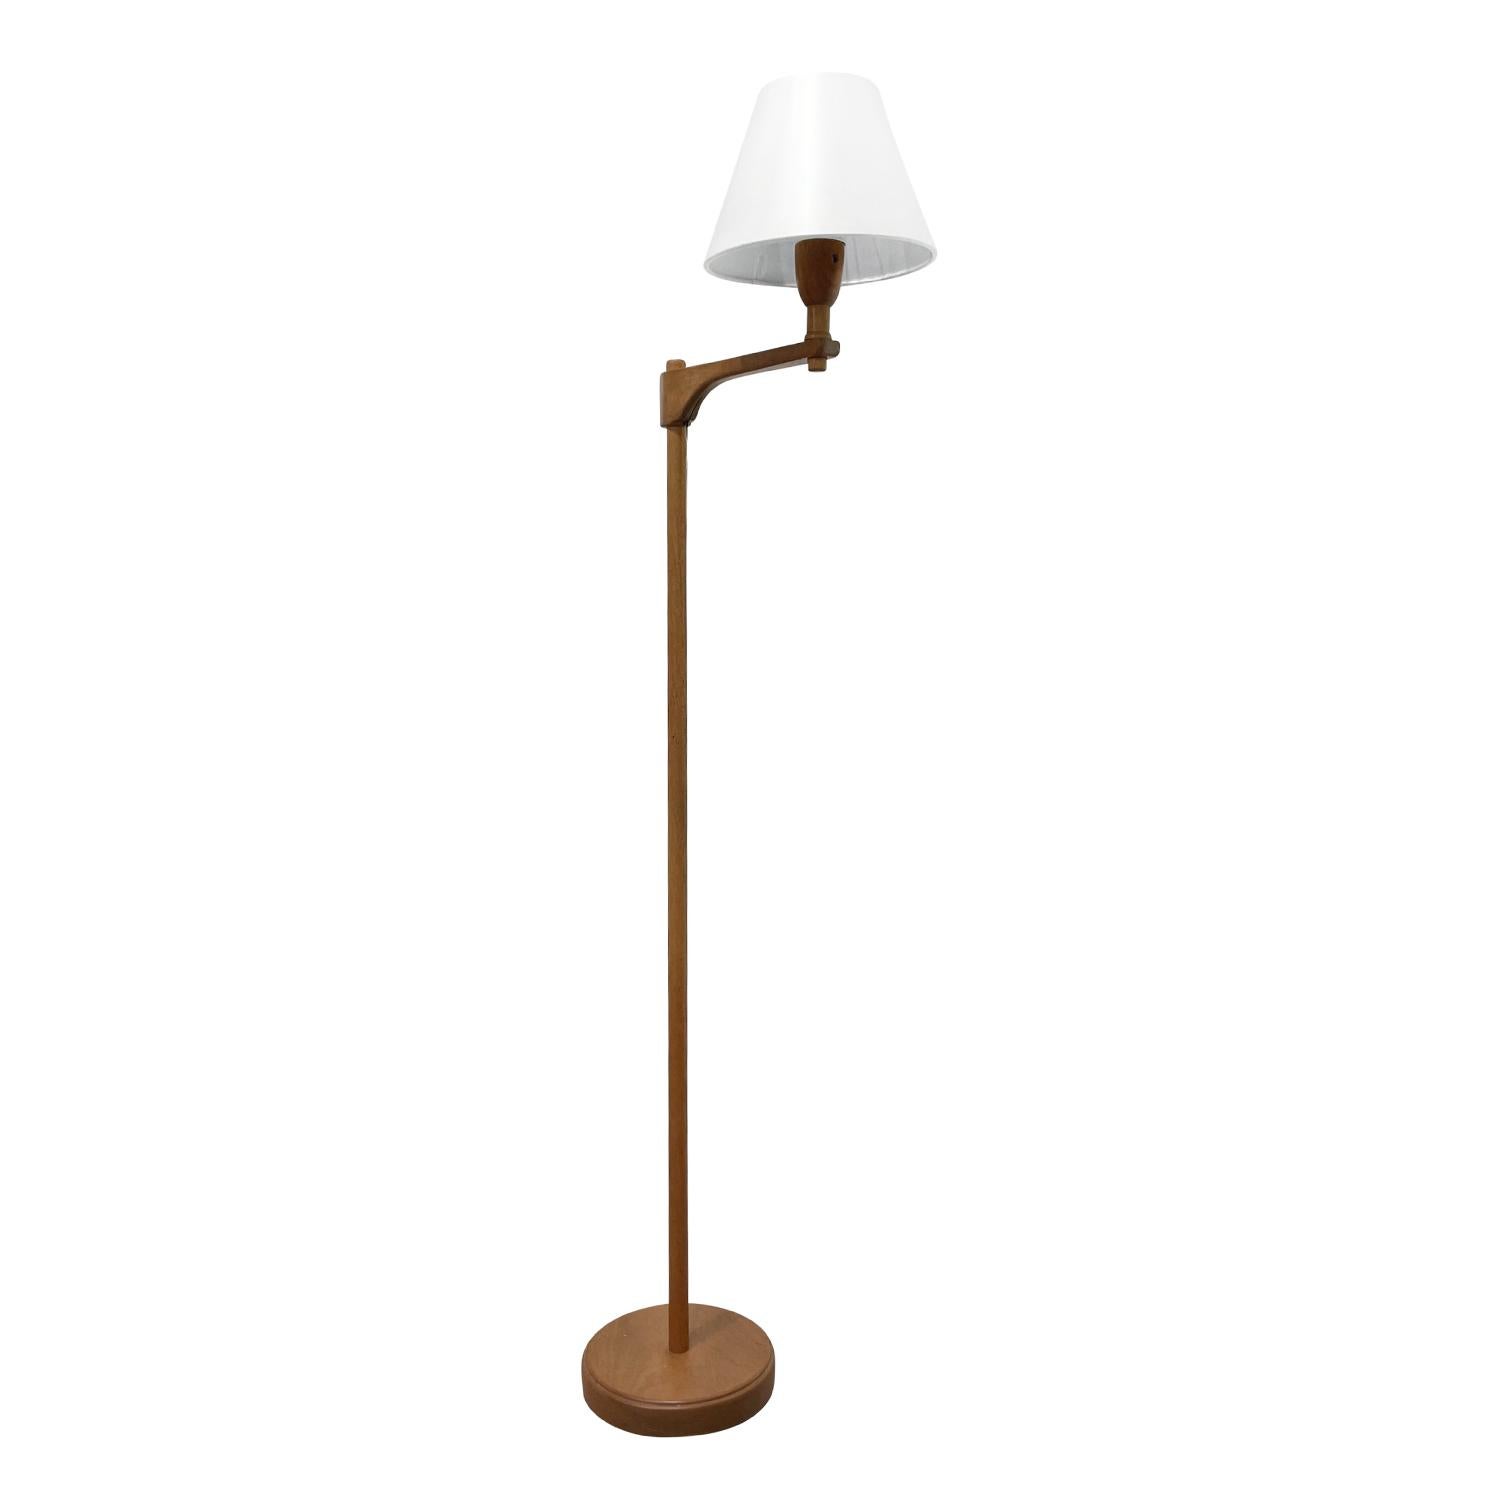 A light-brown, antique Swedish Gustavian Staken, floor lamp made of hand carved teak wood, designed by Carl Malmsten in good condition. The Scandinavian reading lamp is composed with a new small round white shade attached to a flexible, adjustable